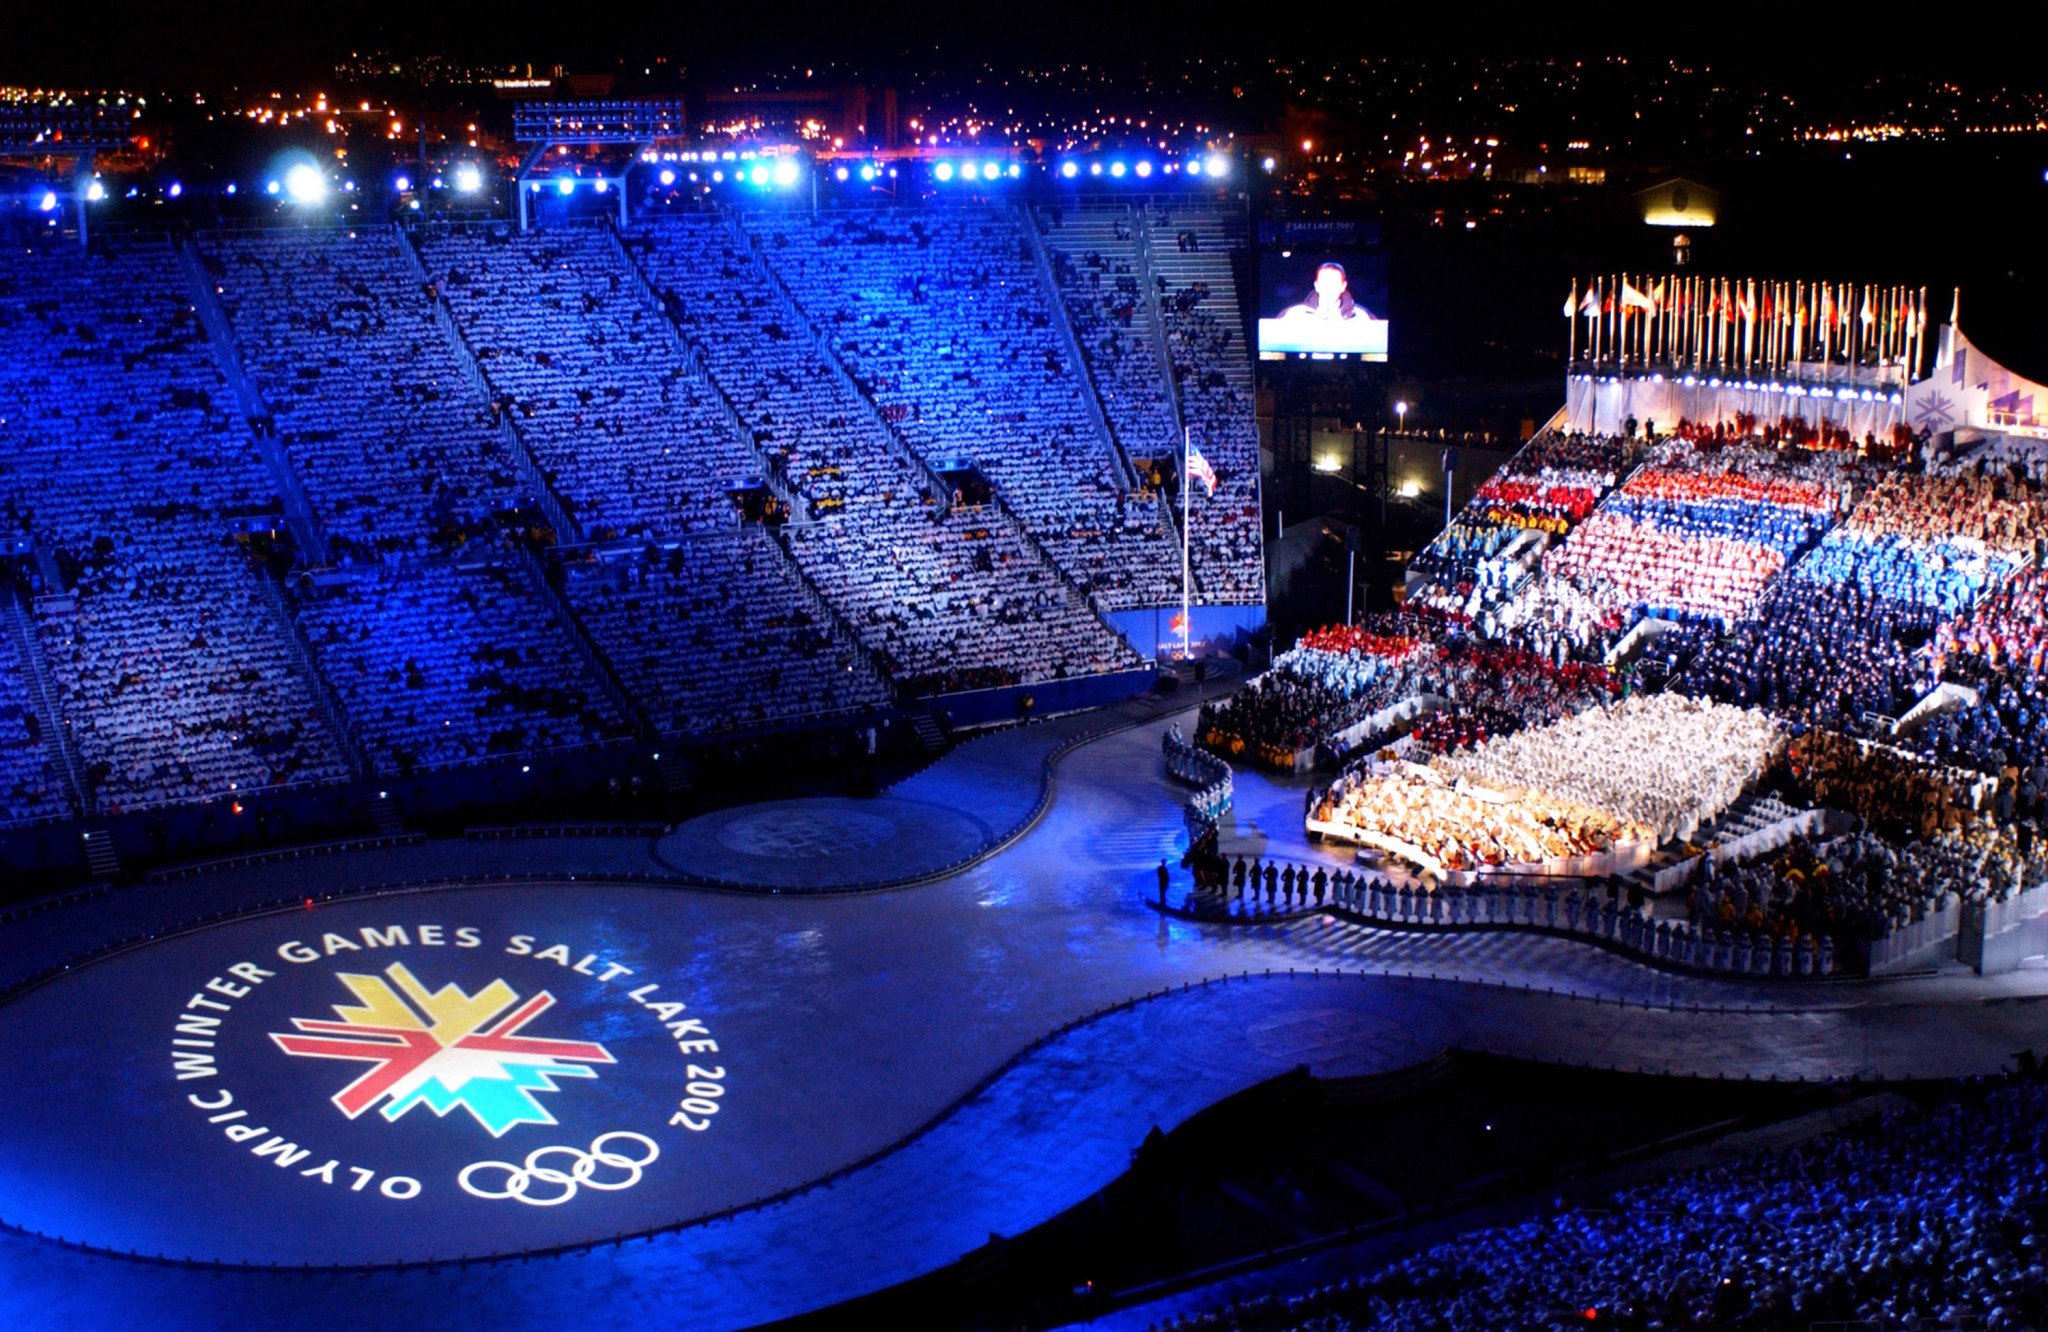 Officials to meet next week to discuss 2030 Winter Olympic Bid in Salt Lake City